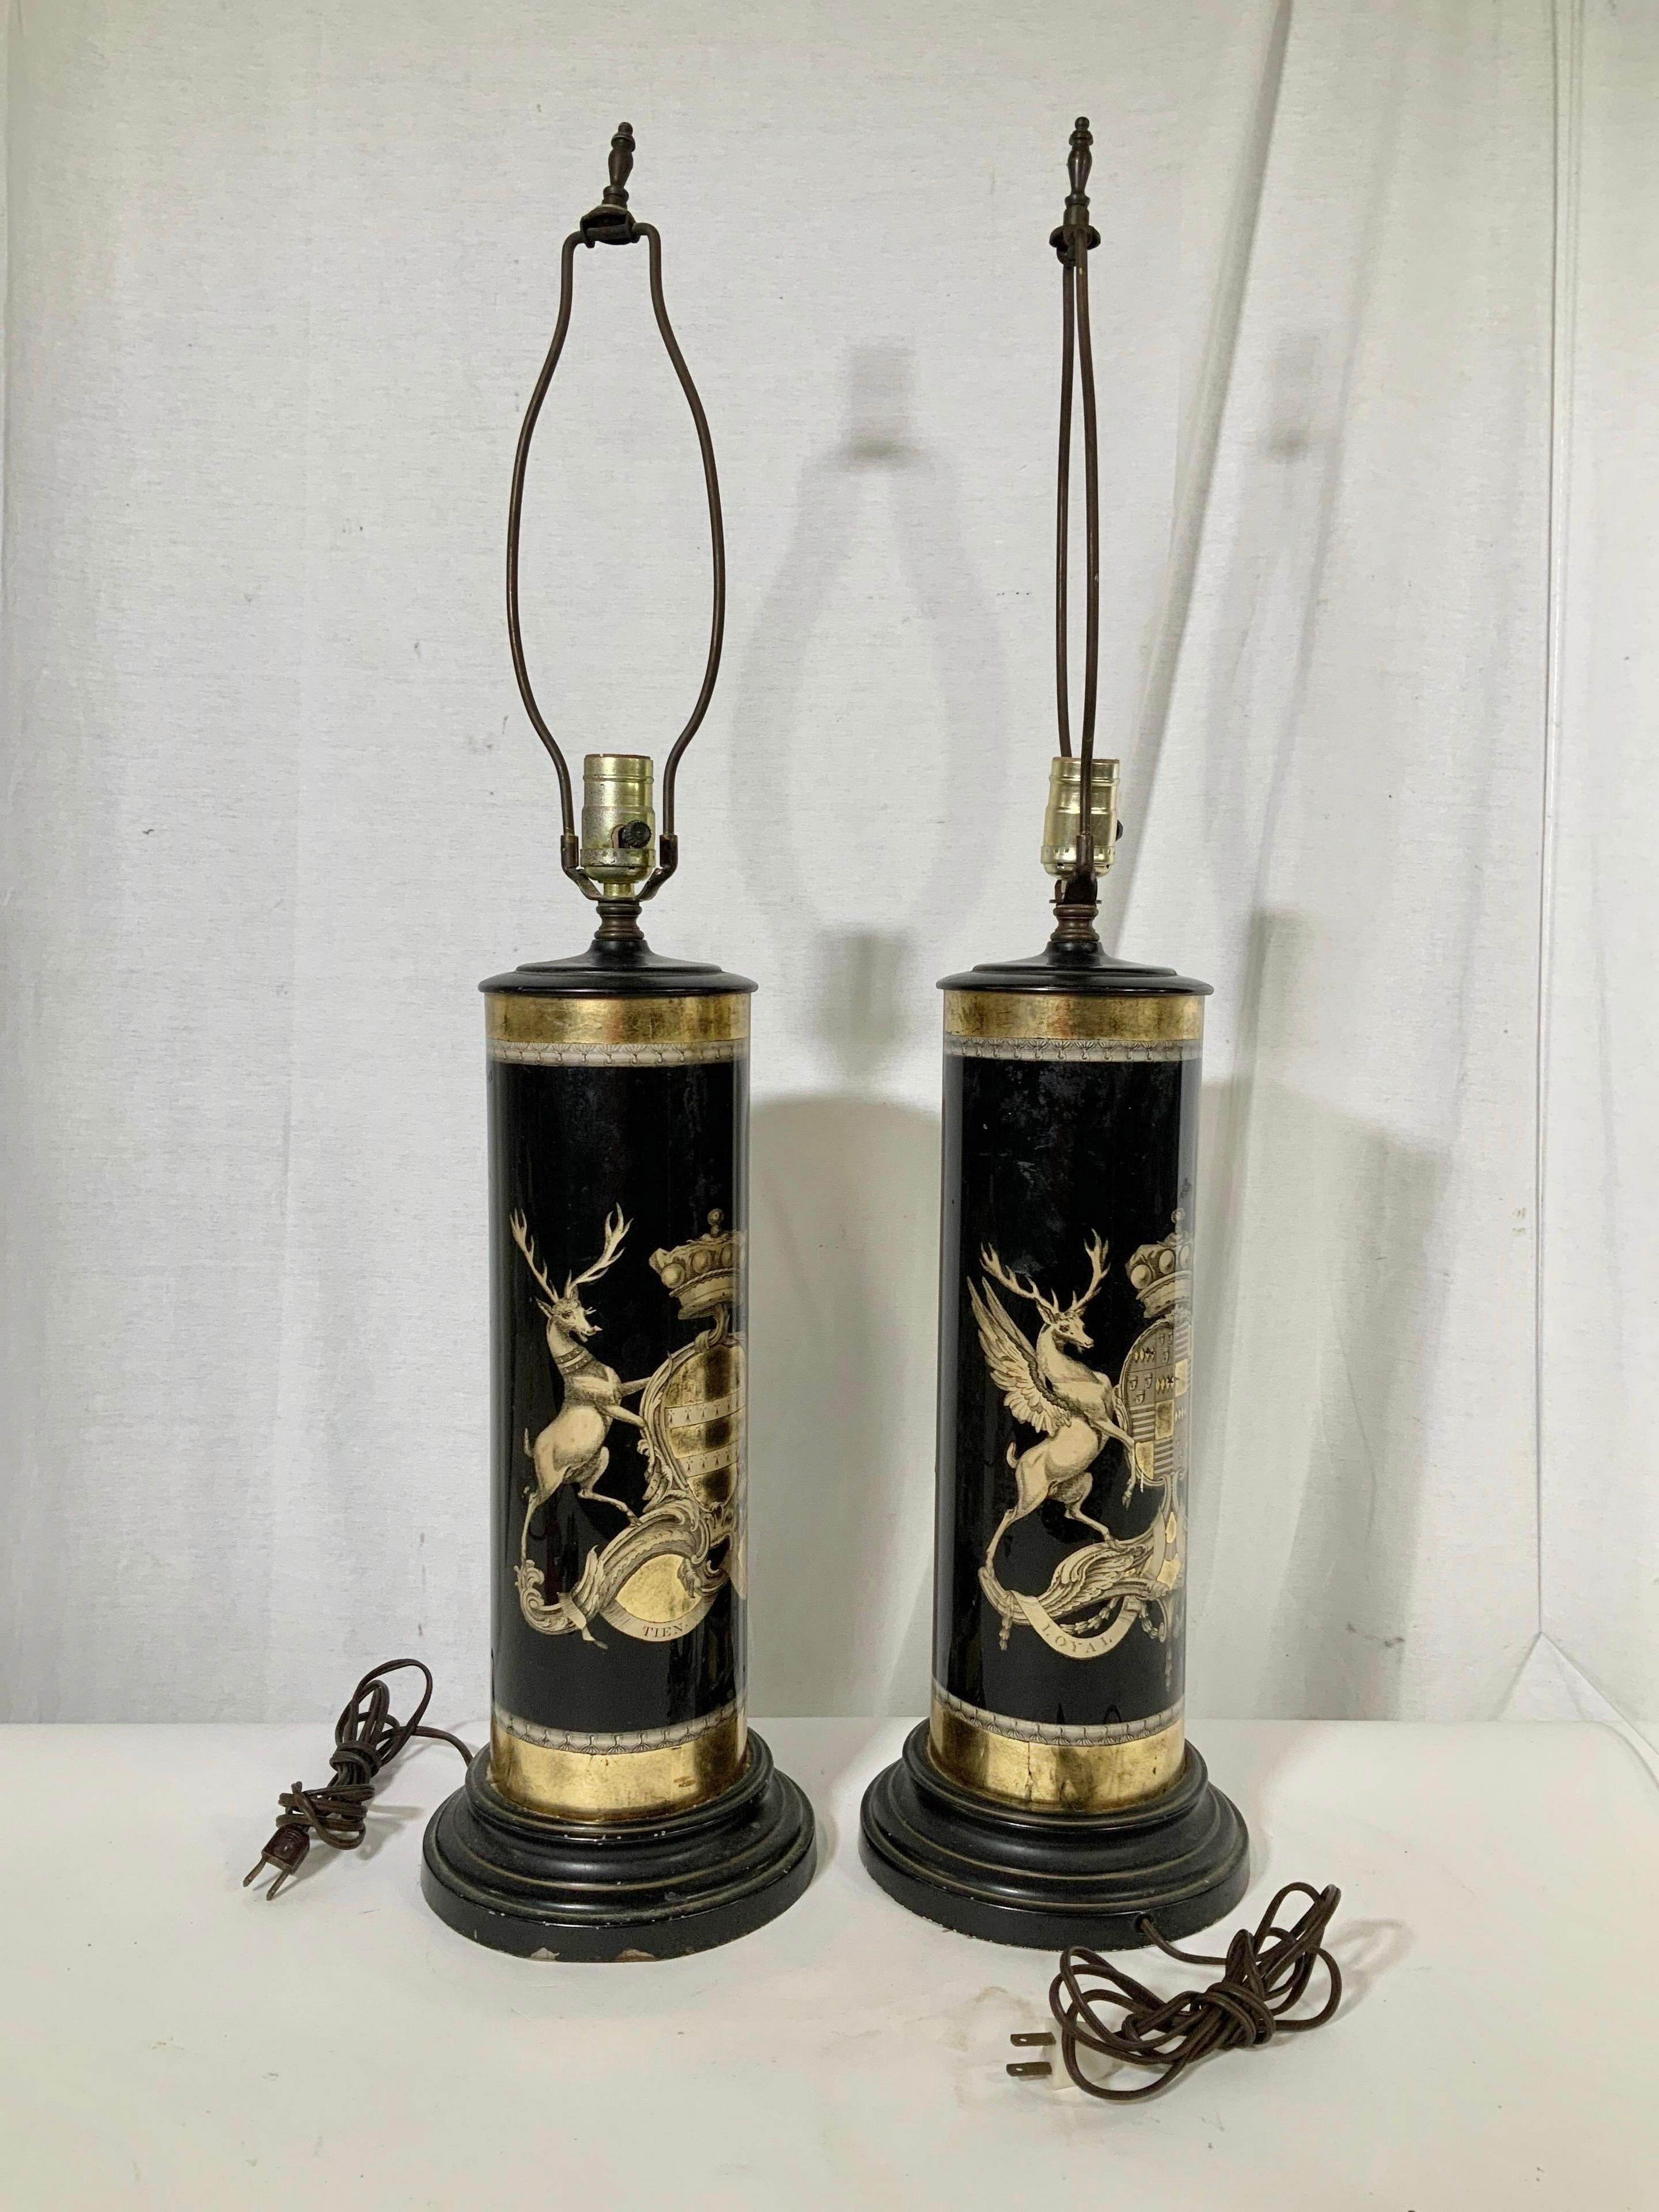 Pair of Verre Églomisé Lamps Coats of Arms for the Earls Bathurst and Granville For Sale 3